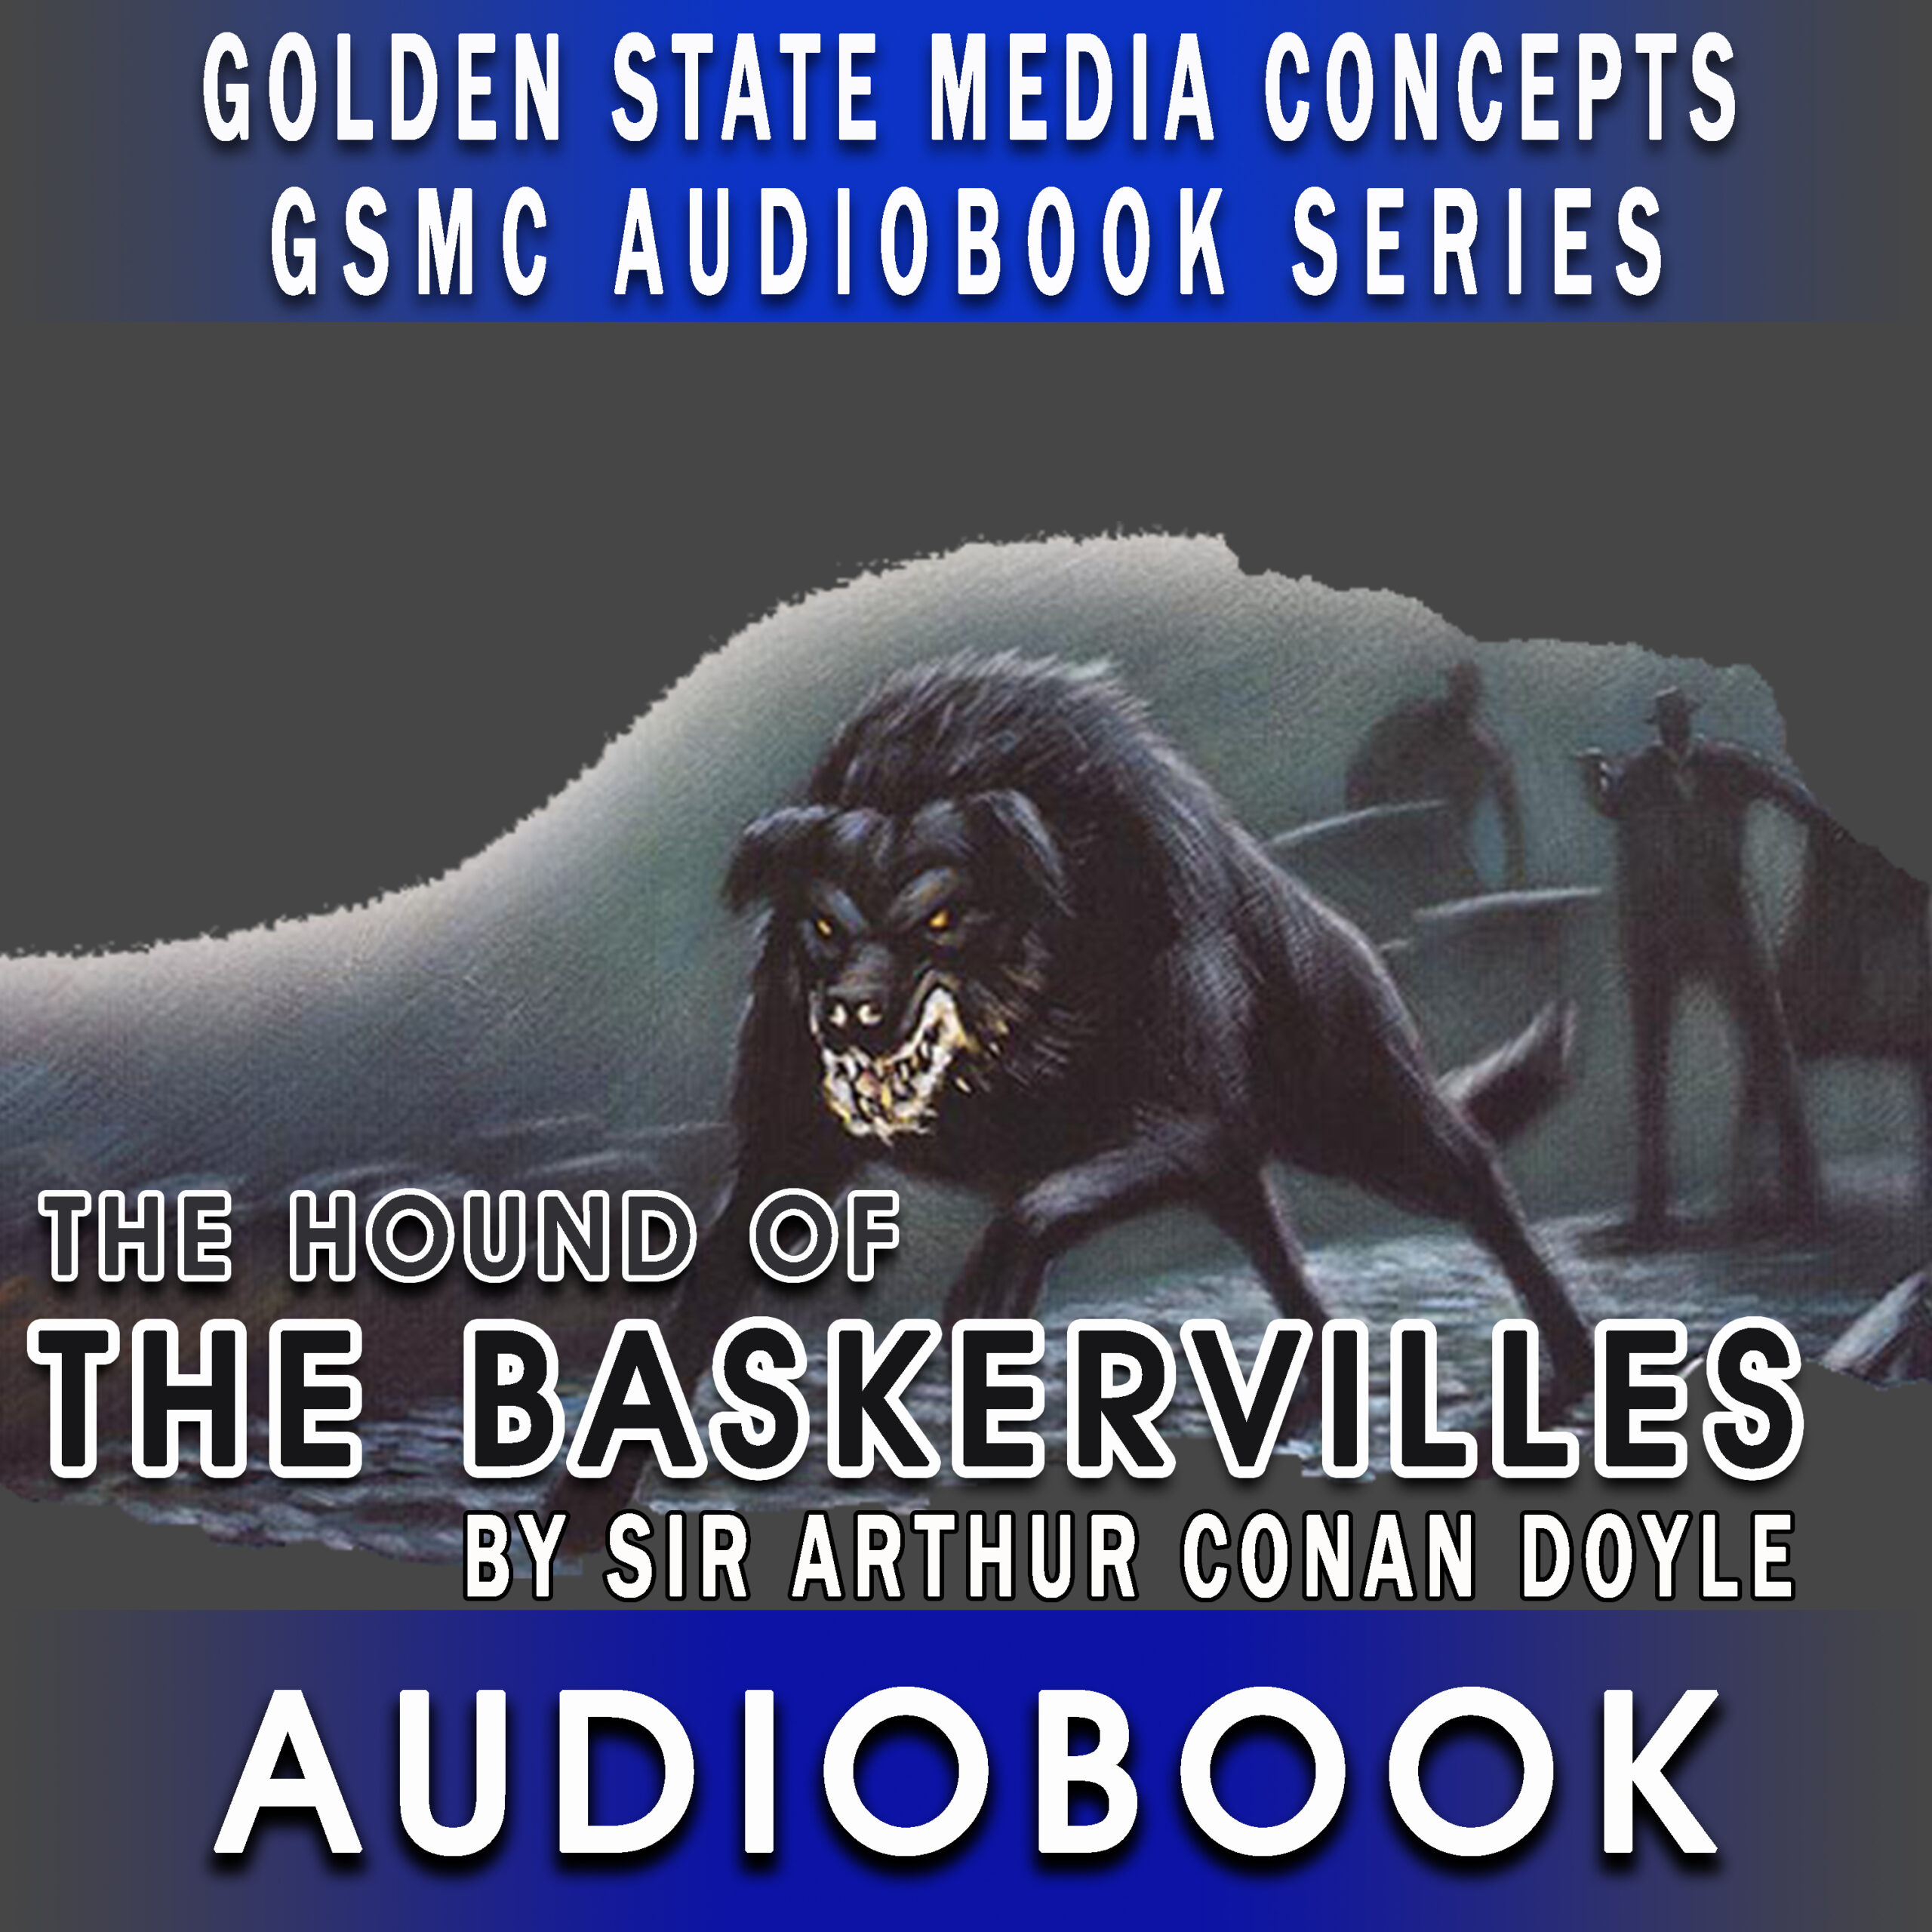 GSMC Audiobook Series: The Hound of the Baskervilles